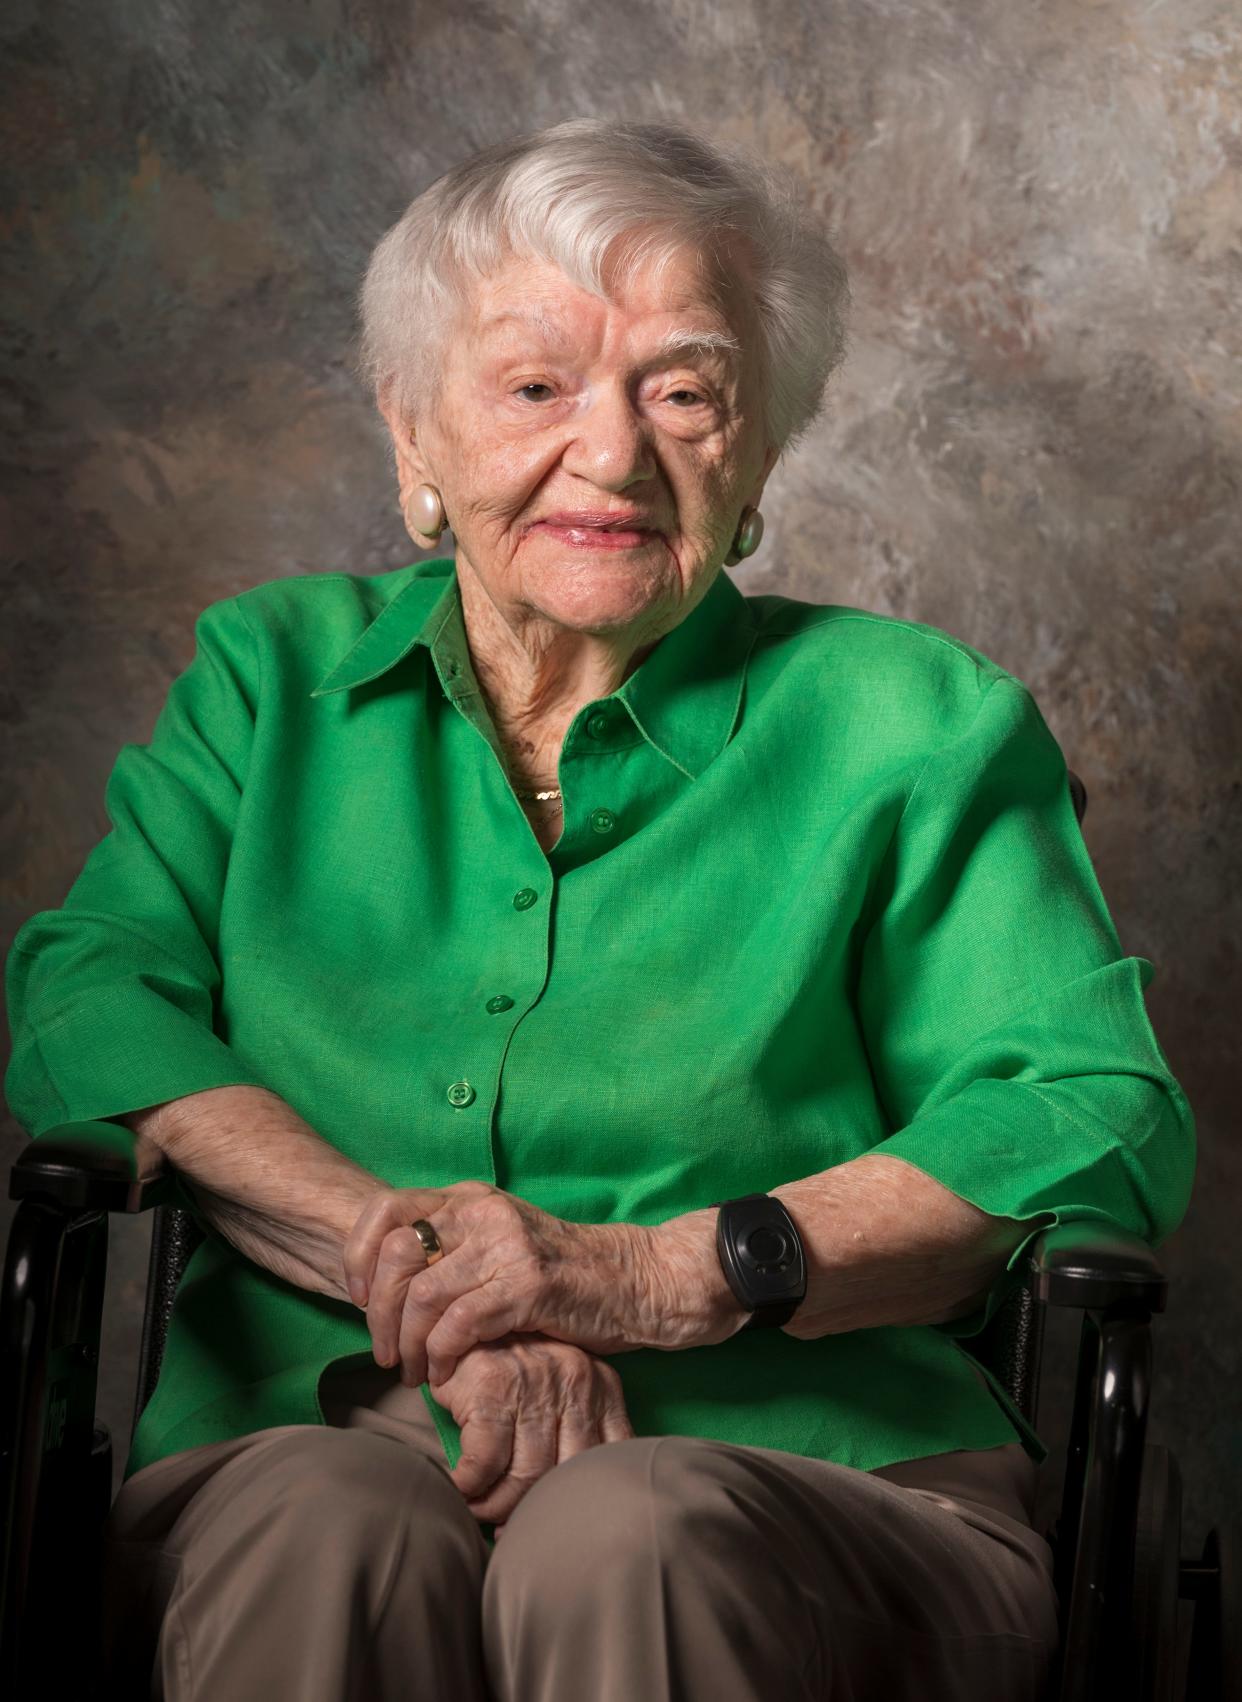 Dr. Helen Fagin Holocaust survivor, scholar and human rights activist passed away Monday at the age of 104.